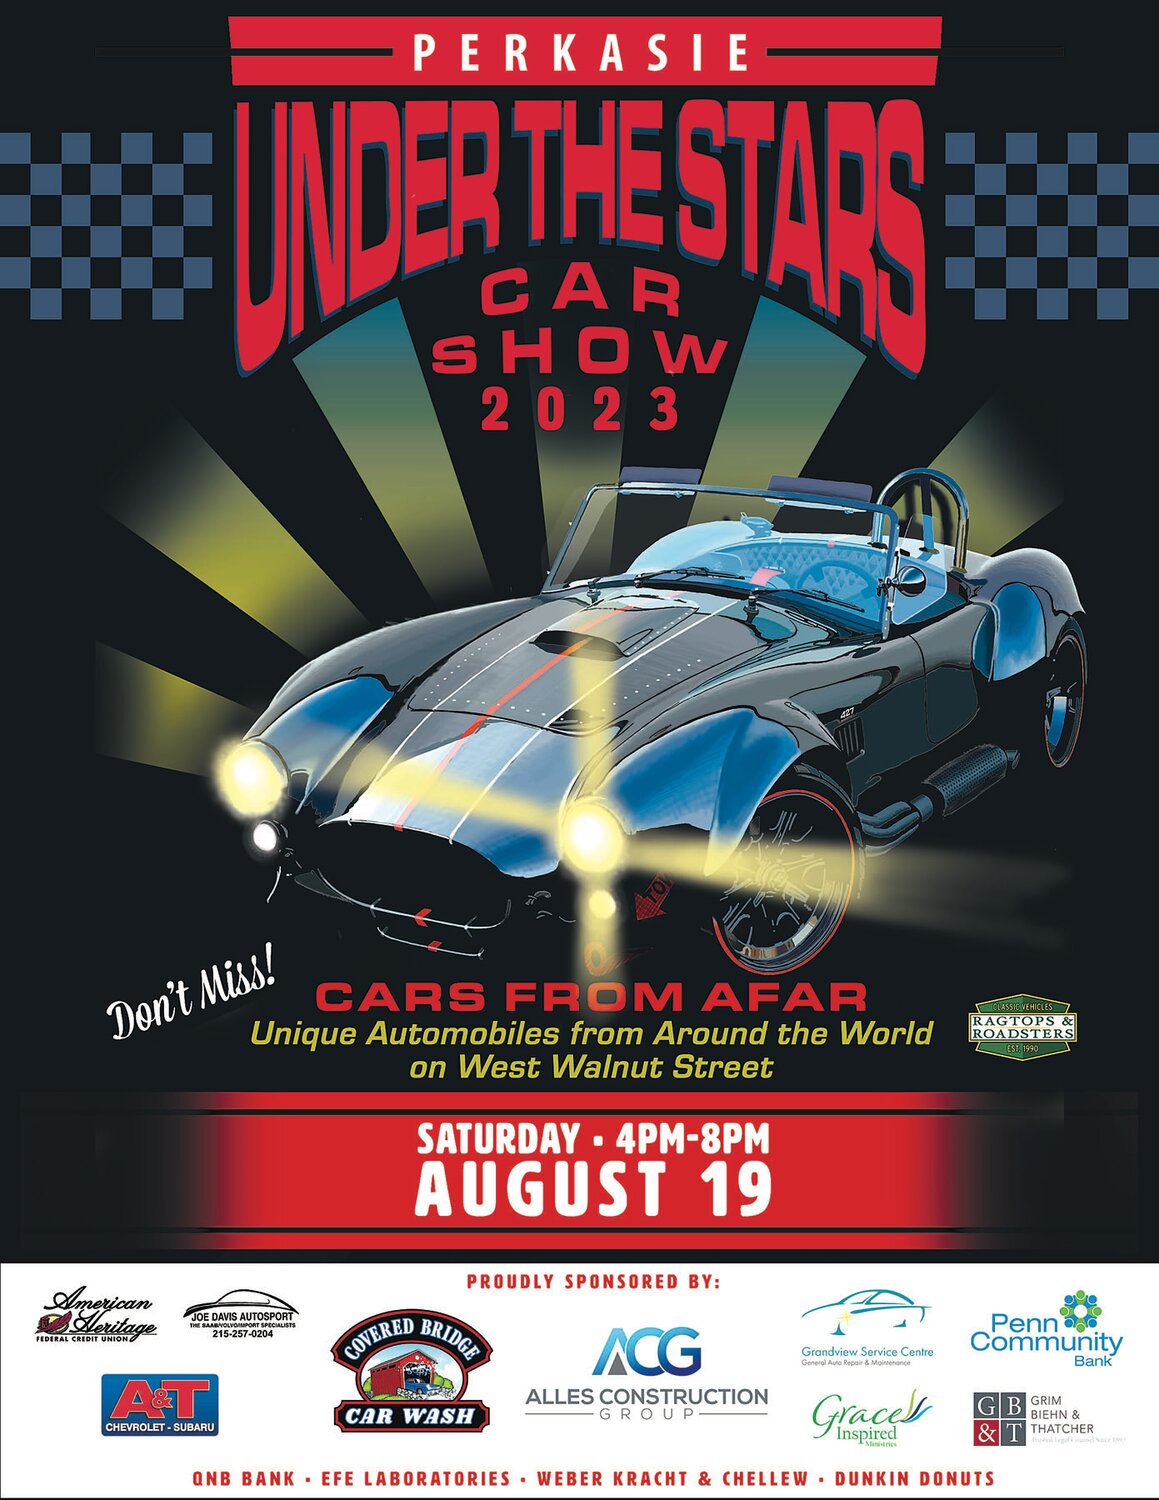 The Perkasie “Under the Stars Car Show” poster features the 2023 Mayor’s Choice winner, a 1965 Shelby Cobra.